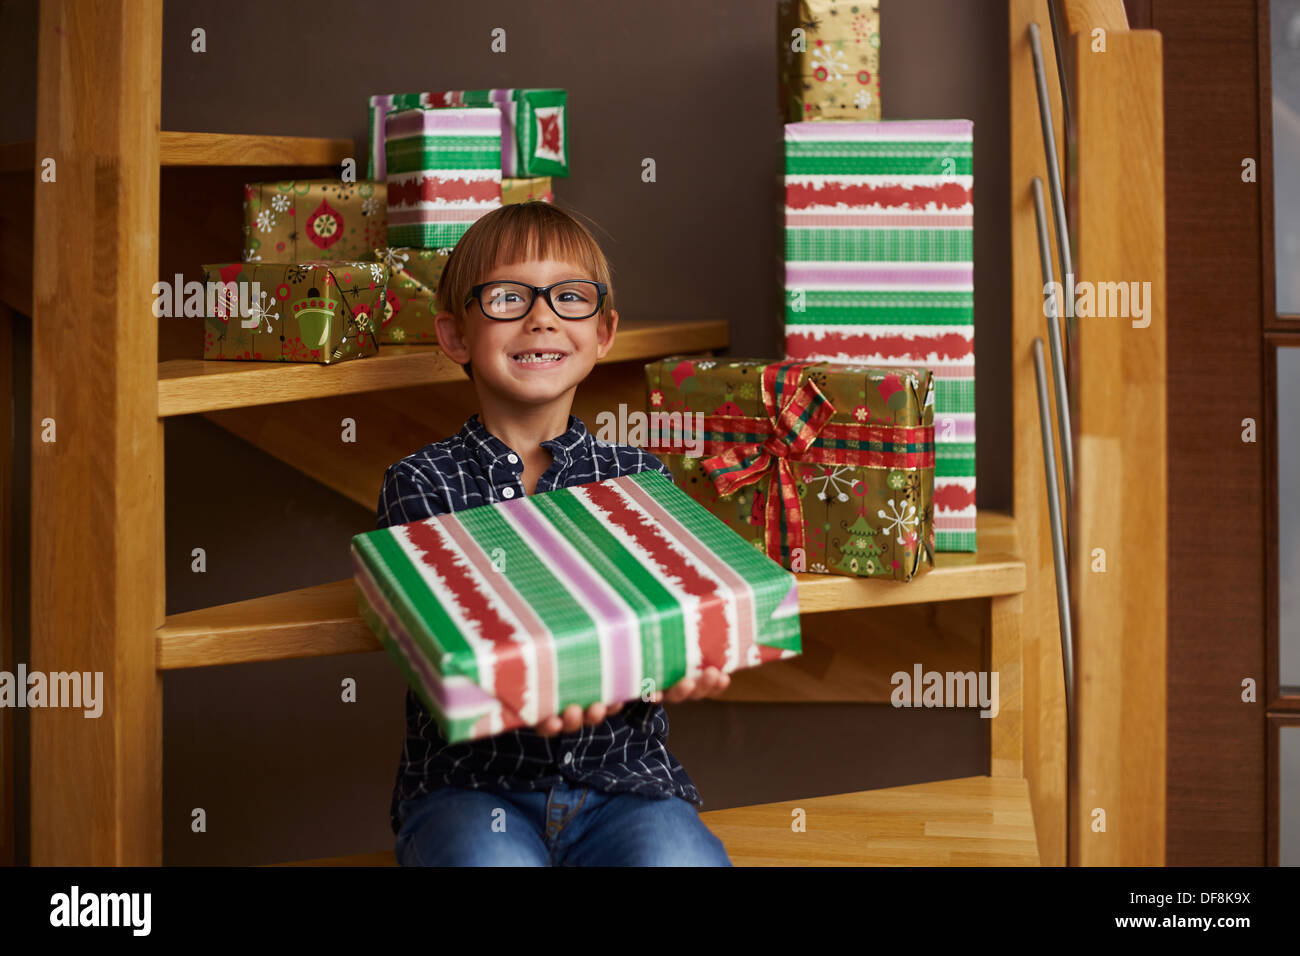 Smiling boy ready to open Christmas presents on the stairs of his house Stock Photo